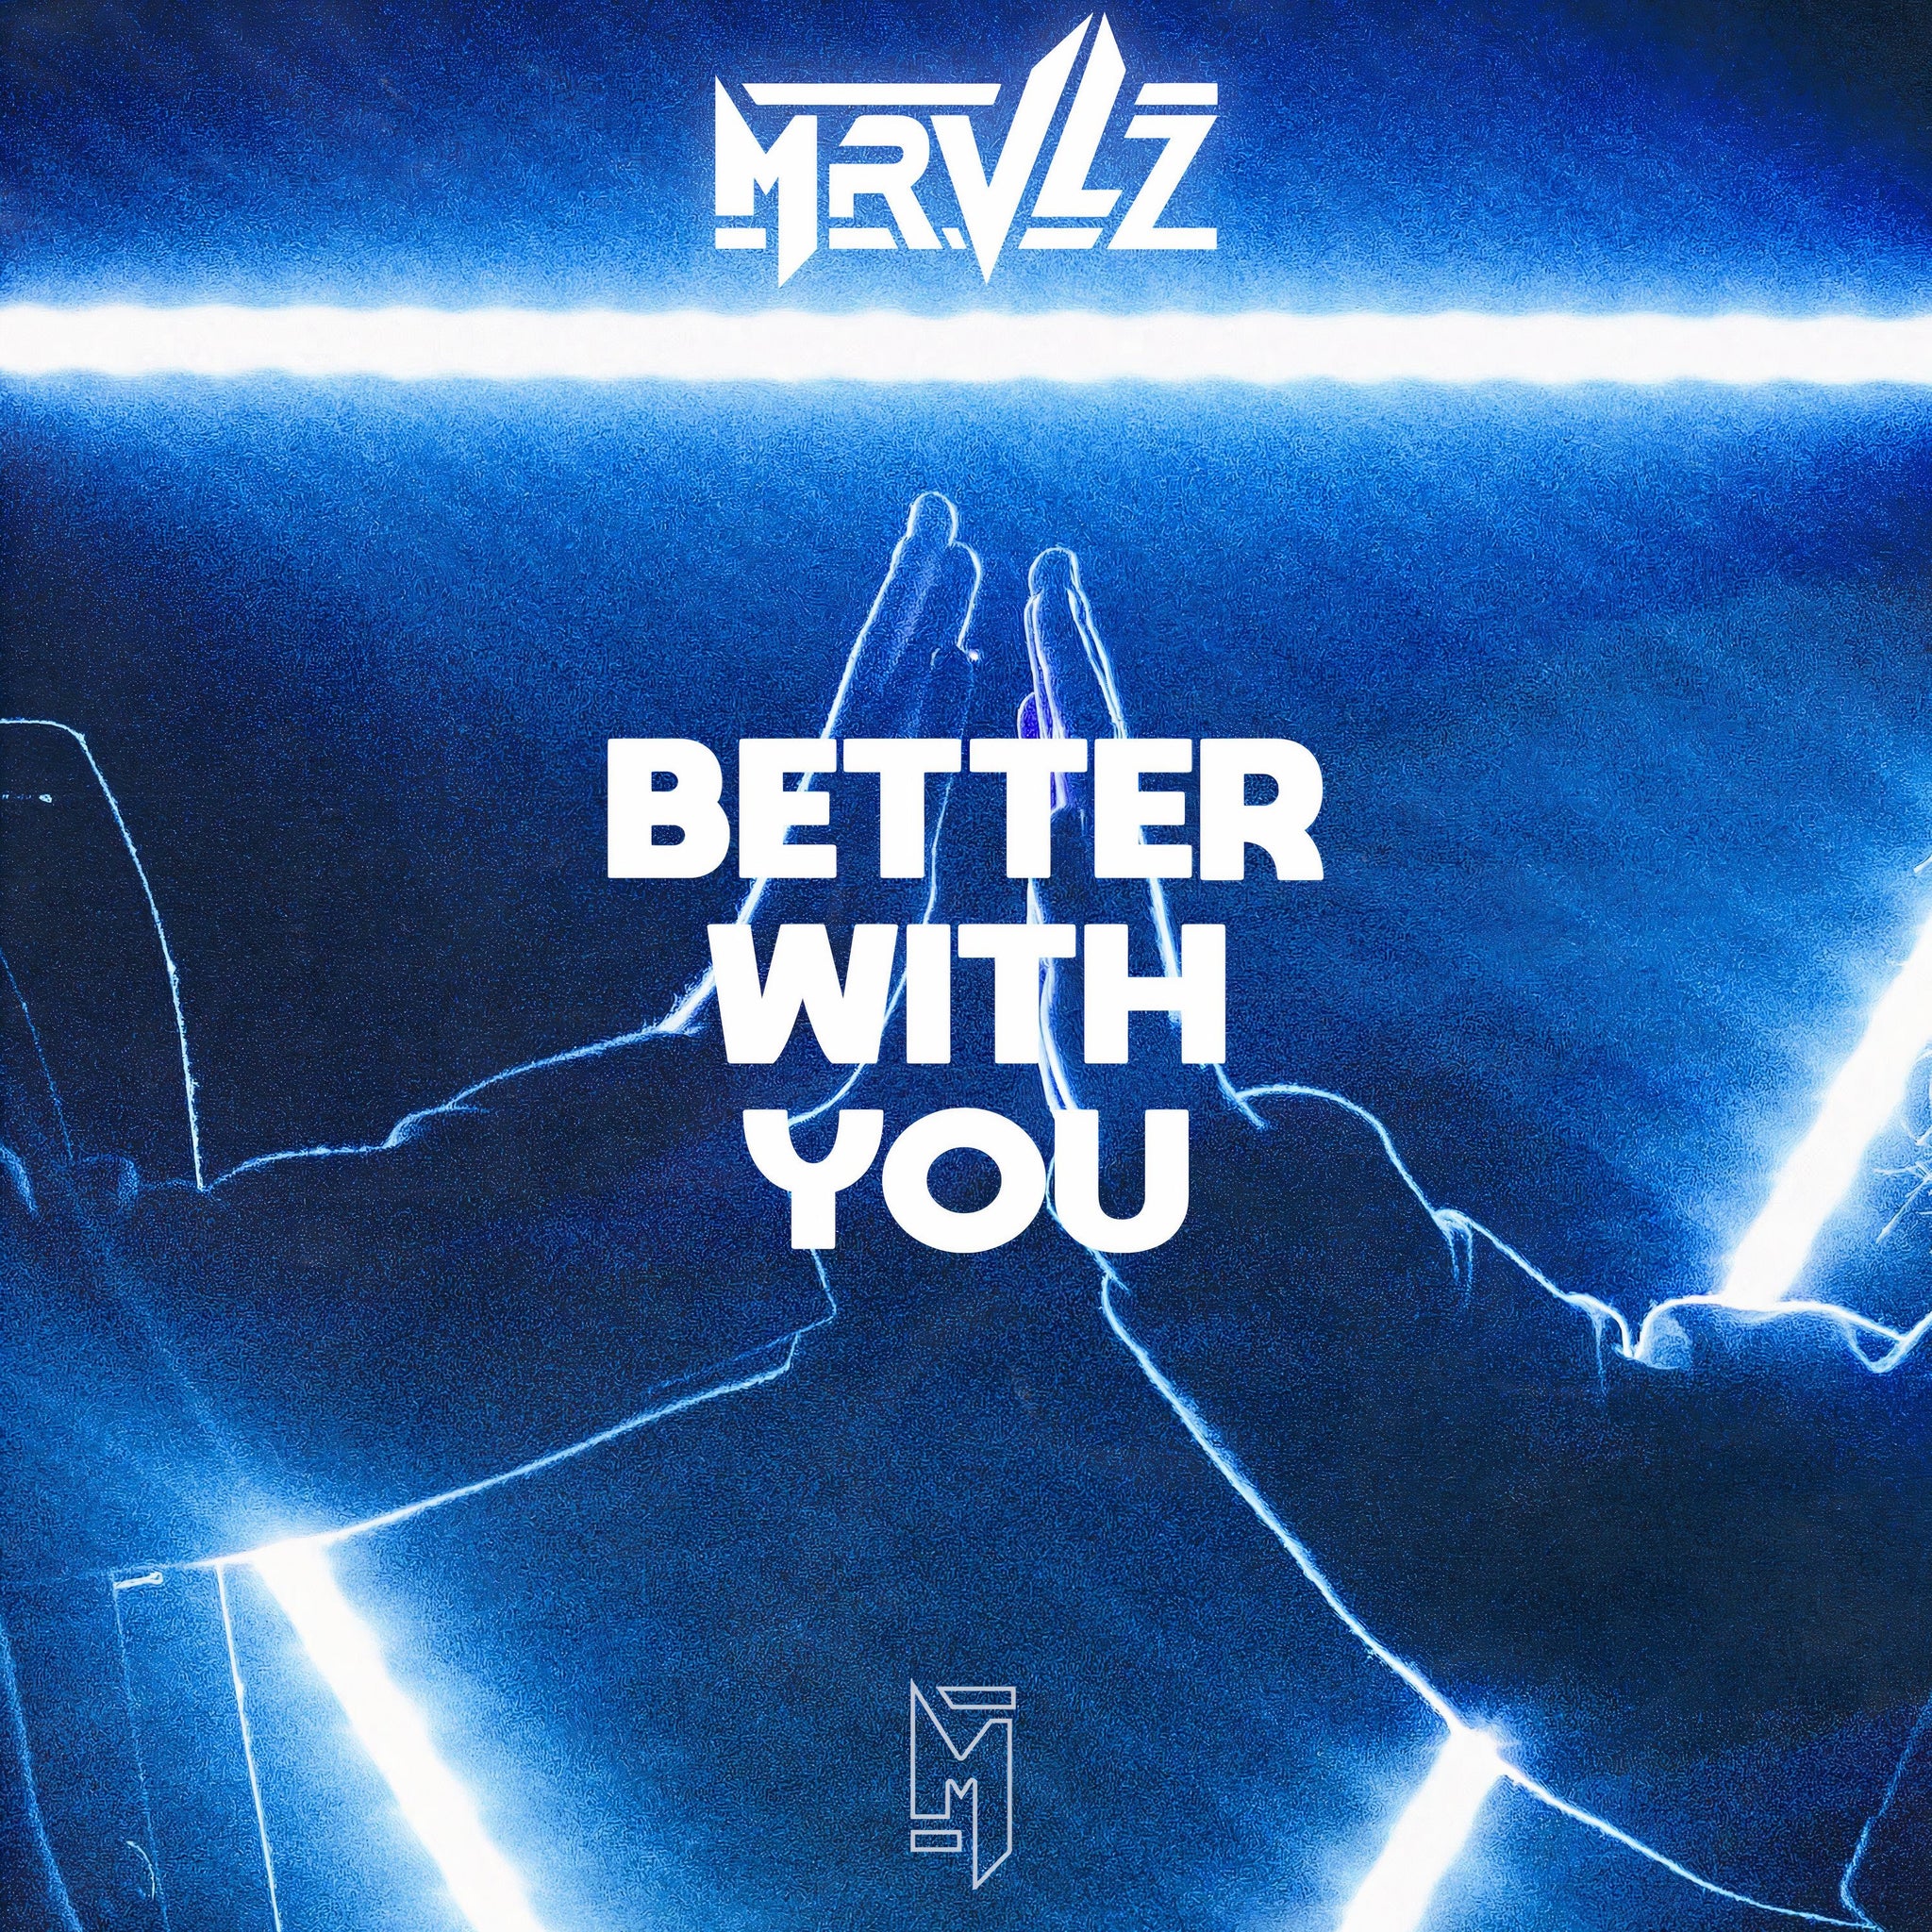 Better With You - MRVLZ - Scraps Audio